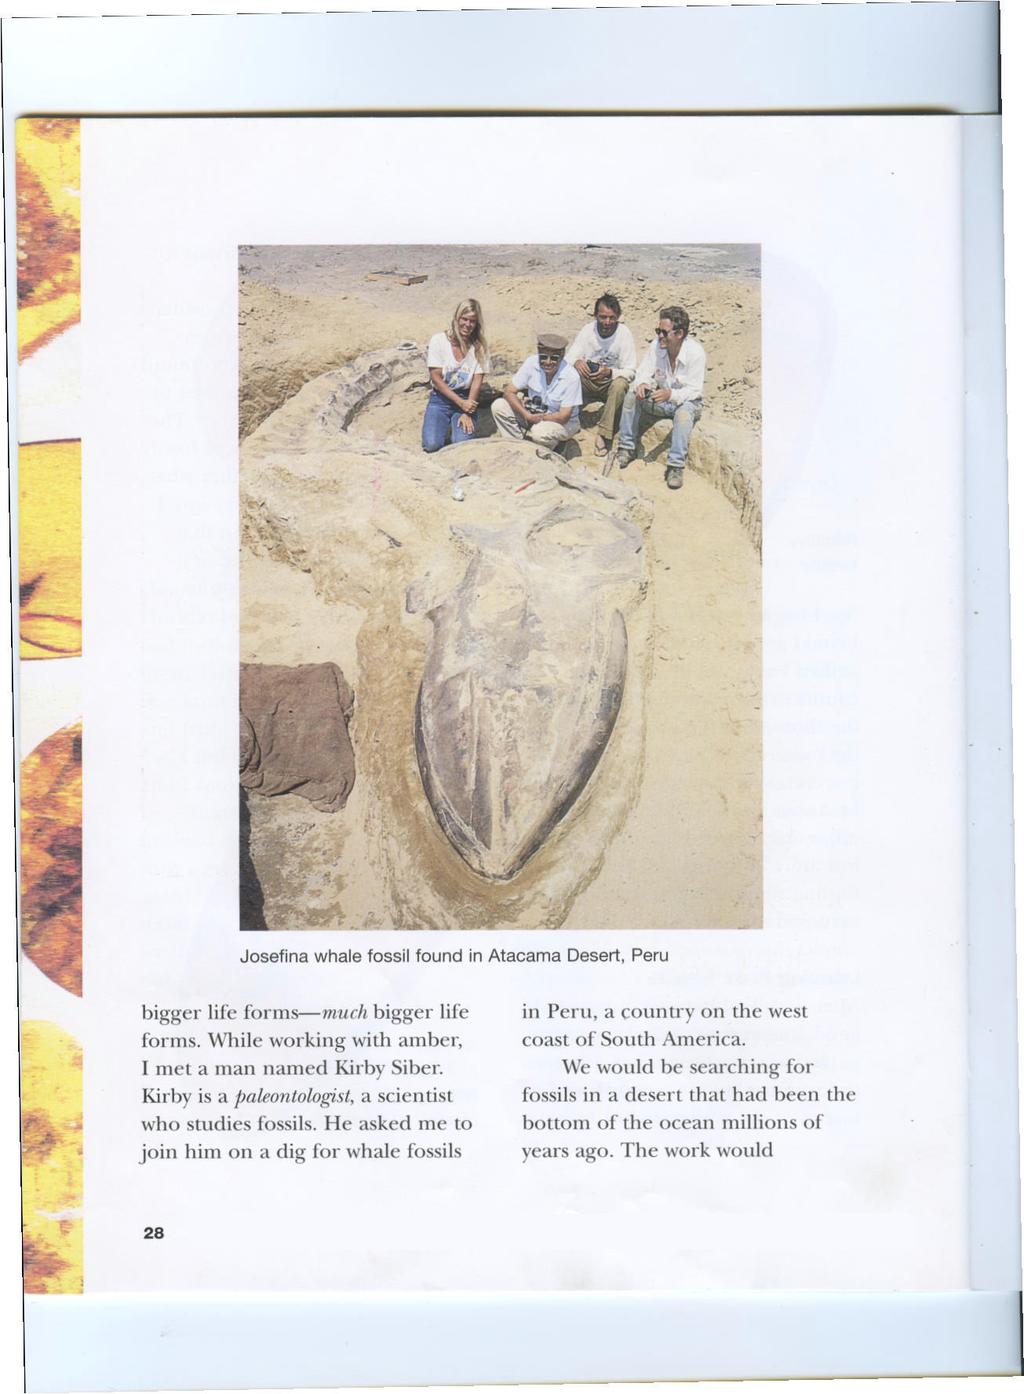 Josefina whale fossil found in Atacama Desert, Peru bigger life forms much bigger life forms. While working with amber, I met a man named Kirby Siber.